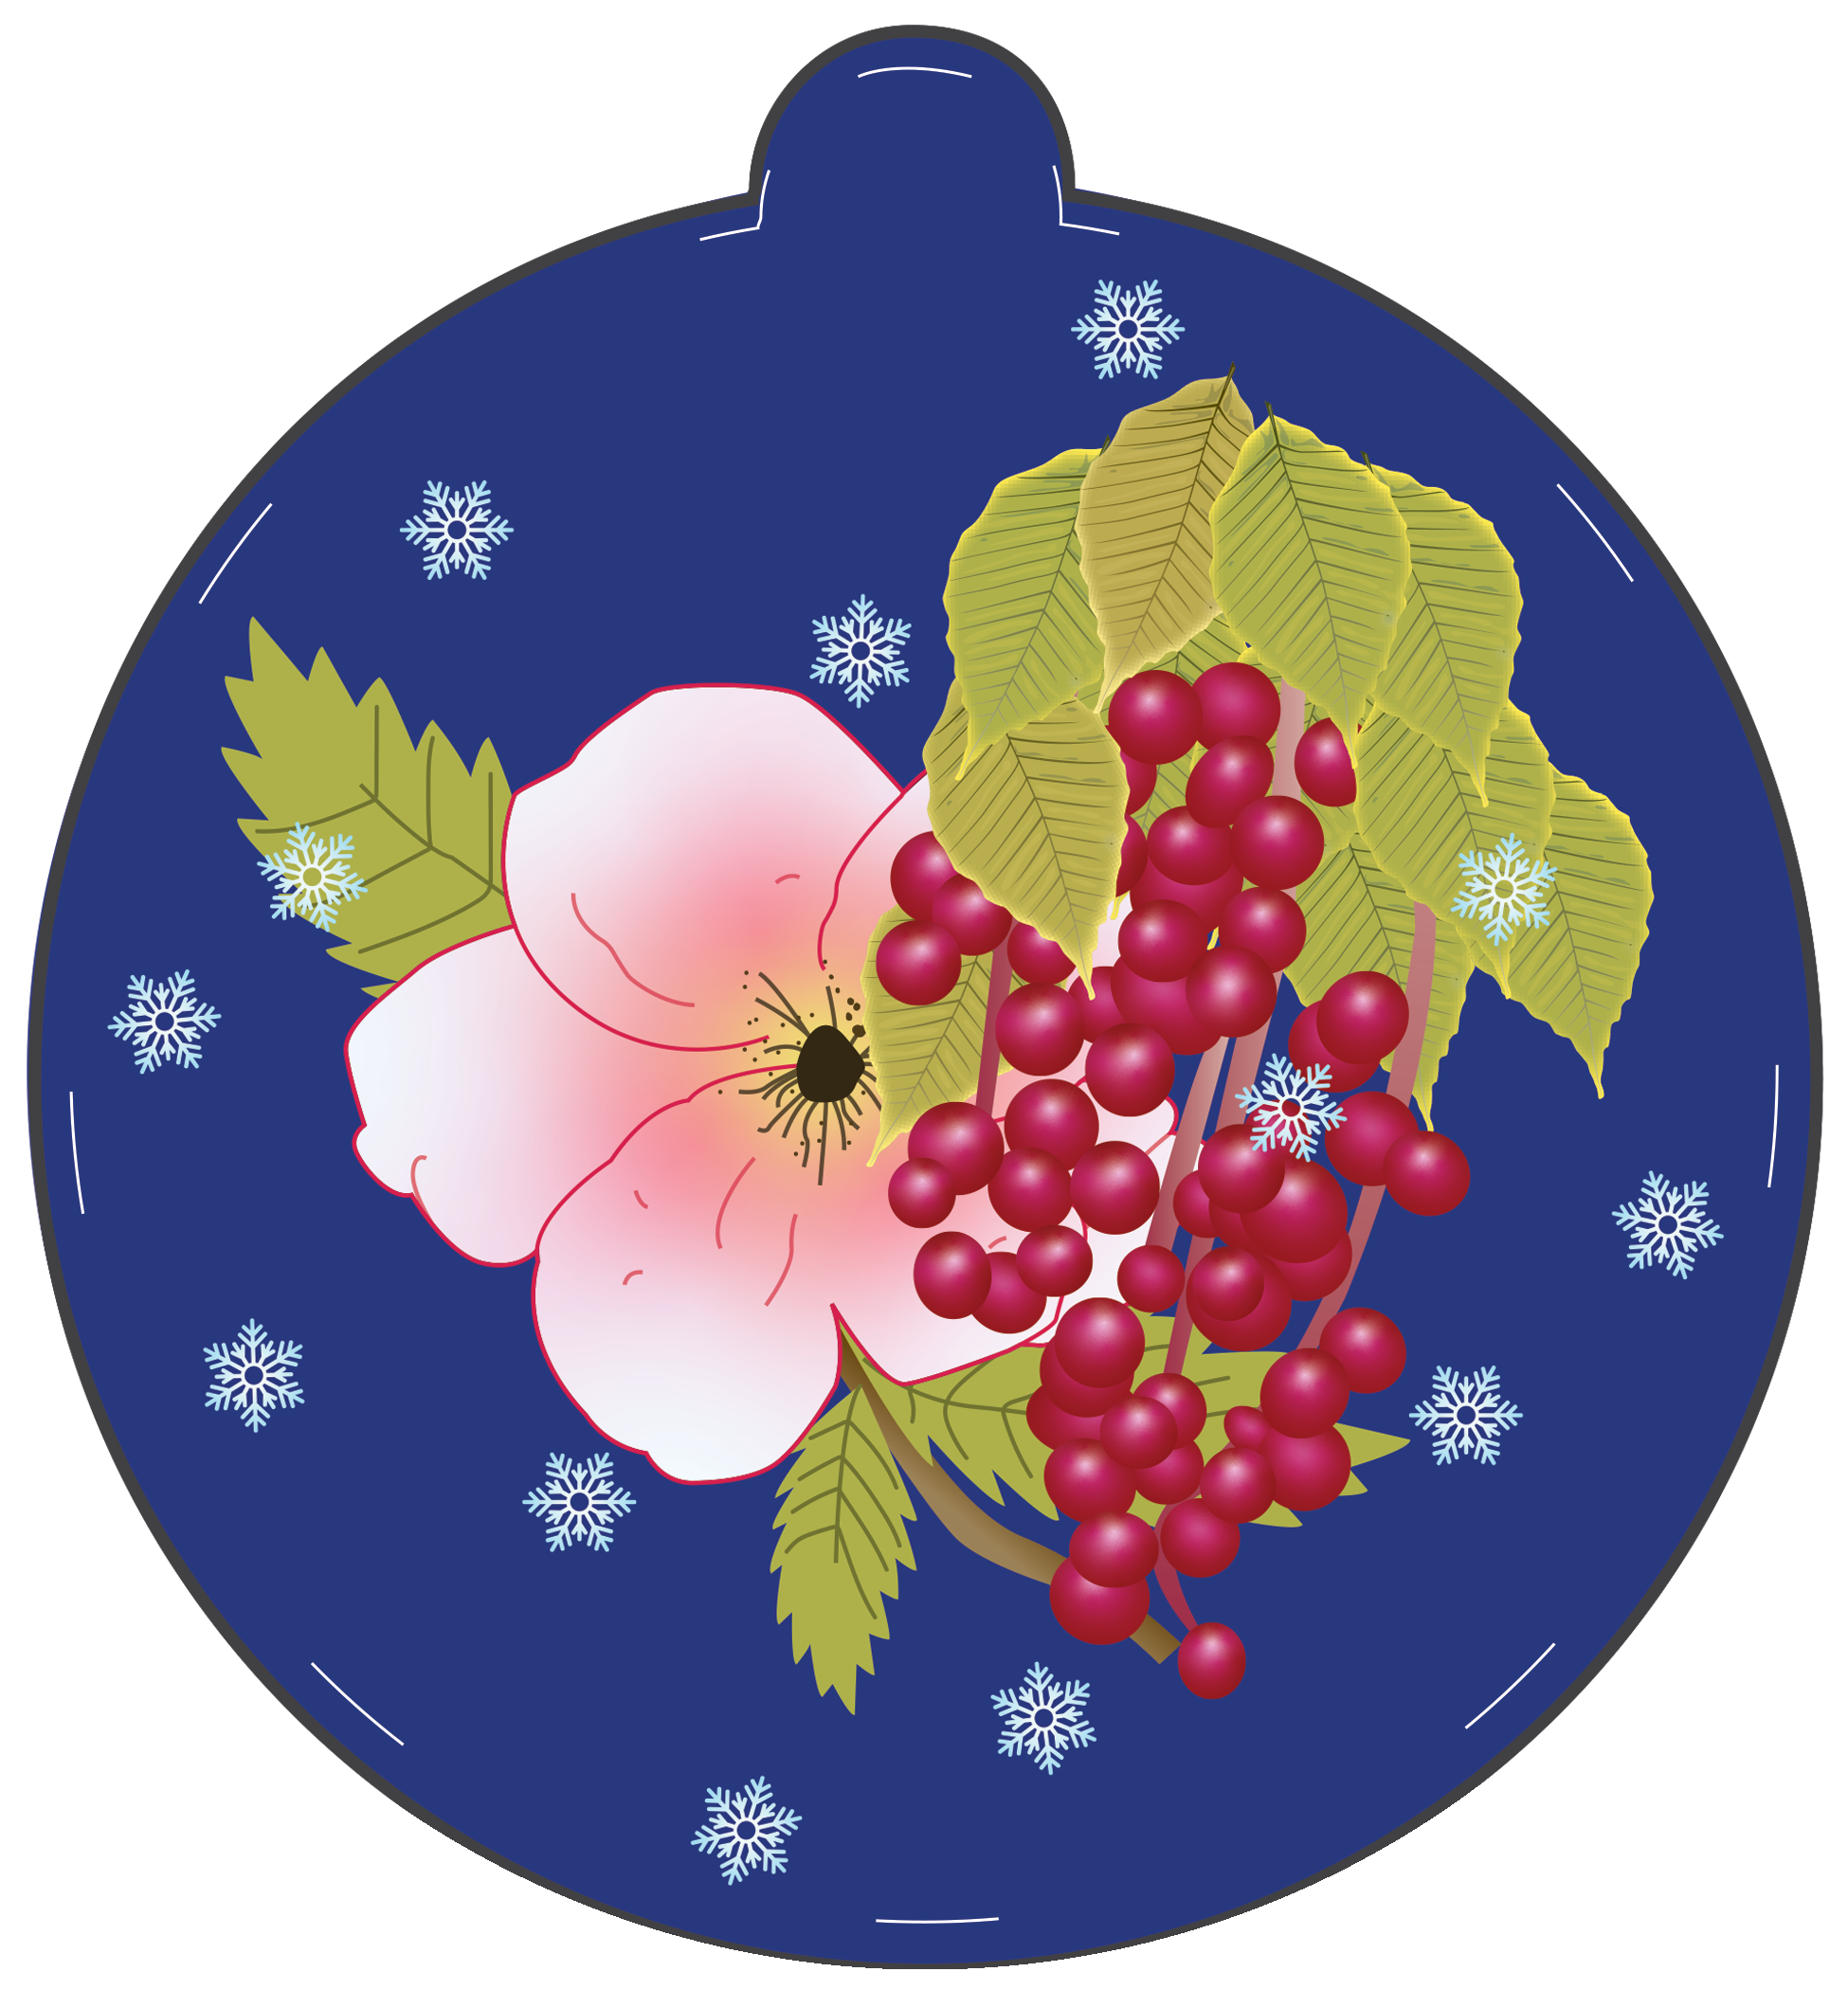 Ornament depicting a flower and berries